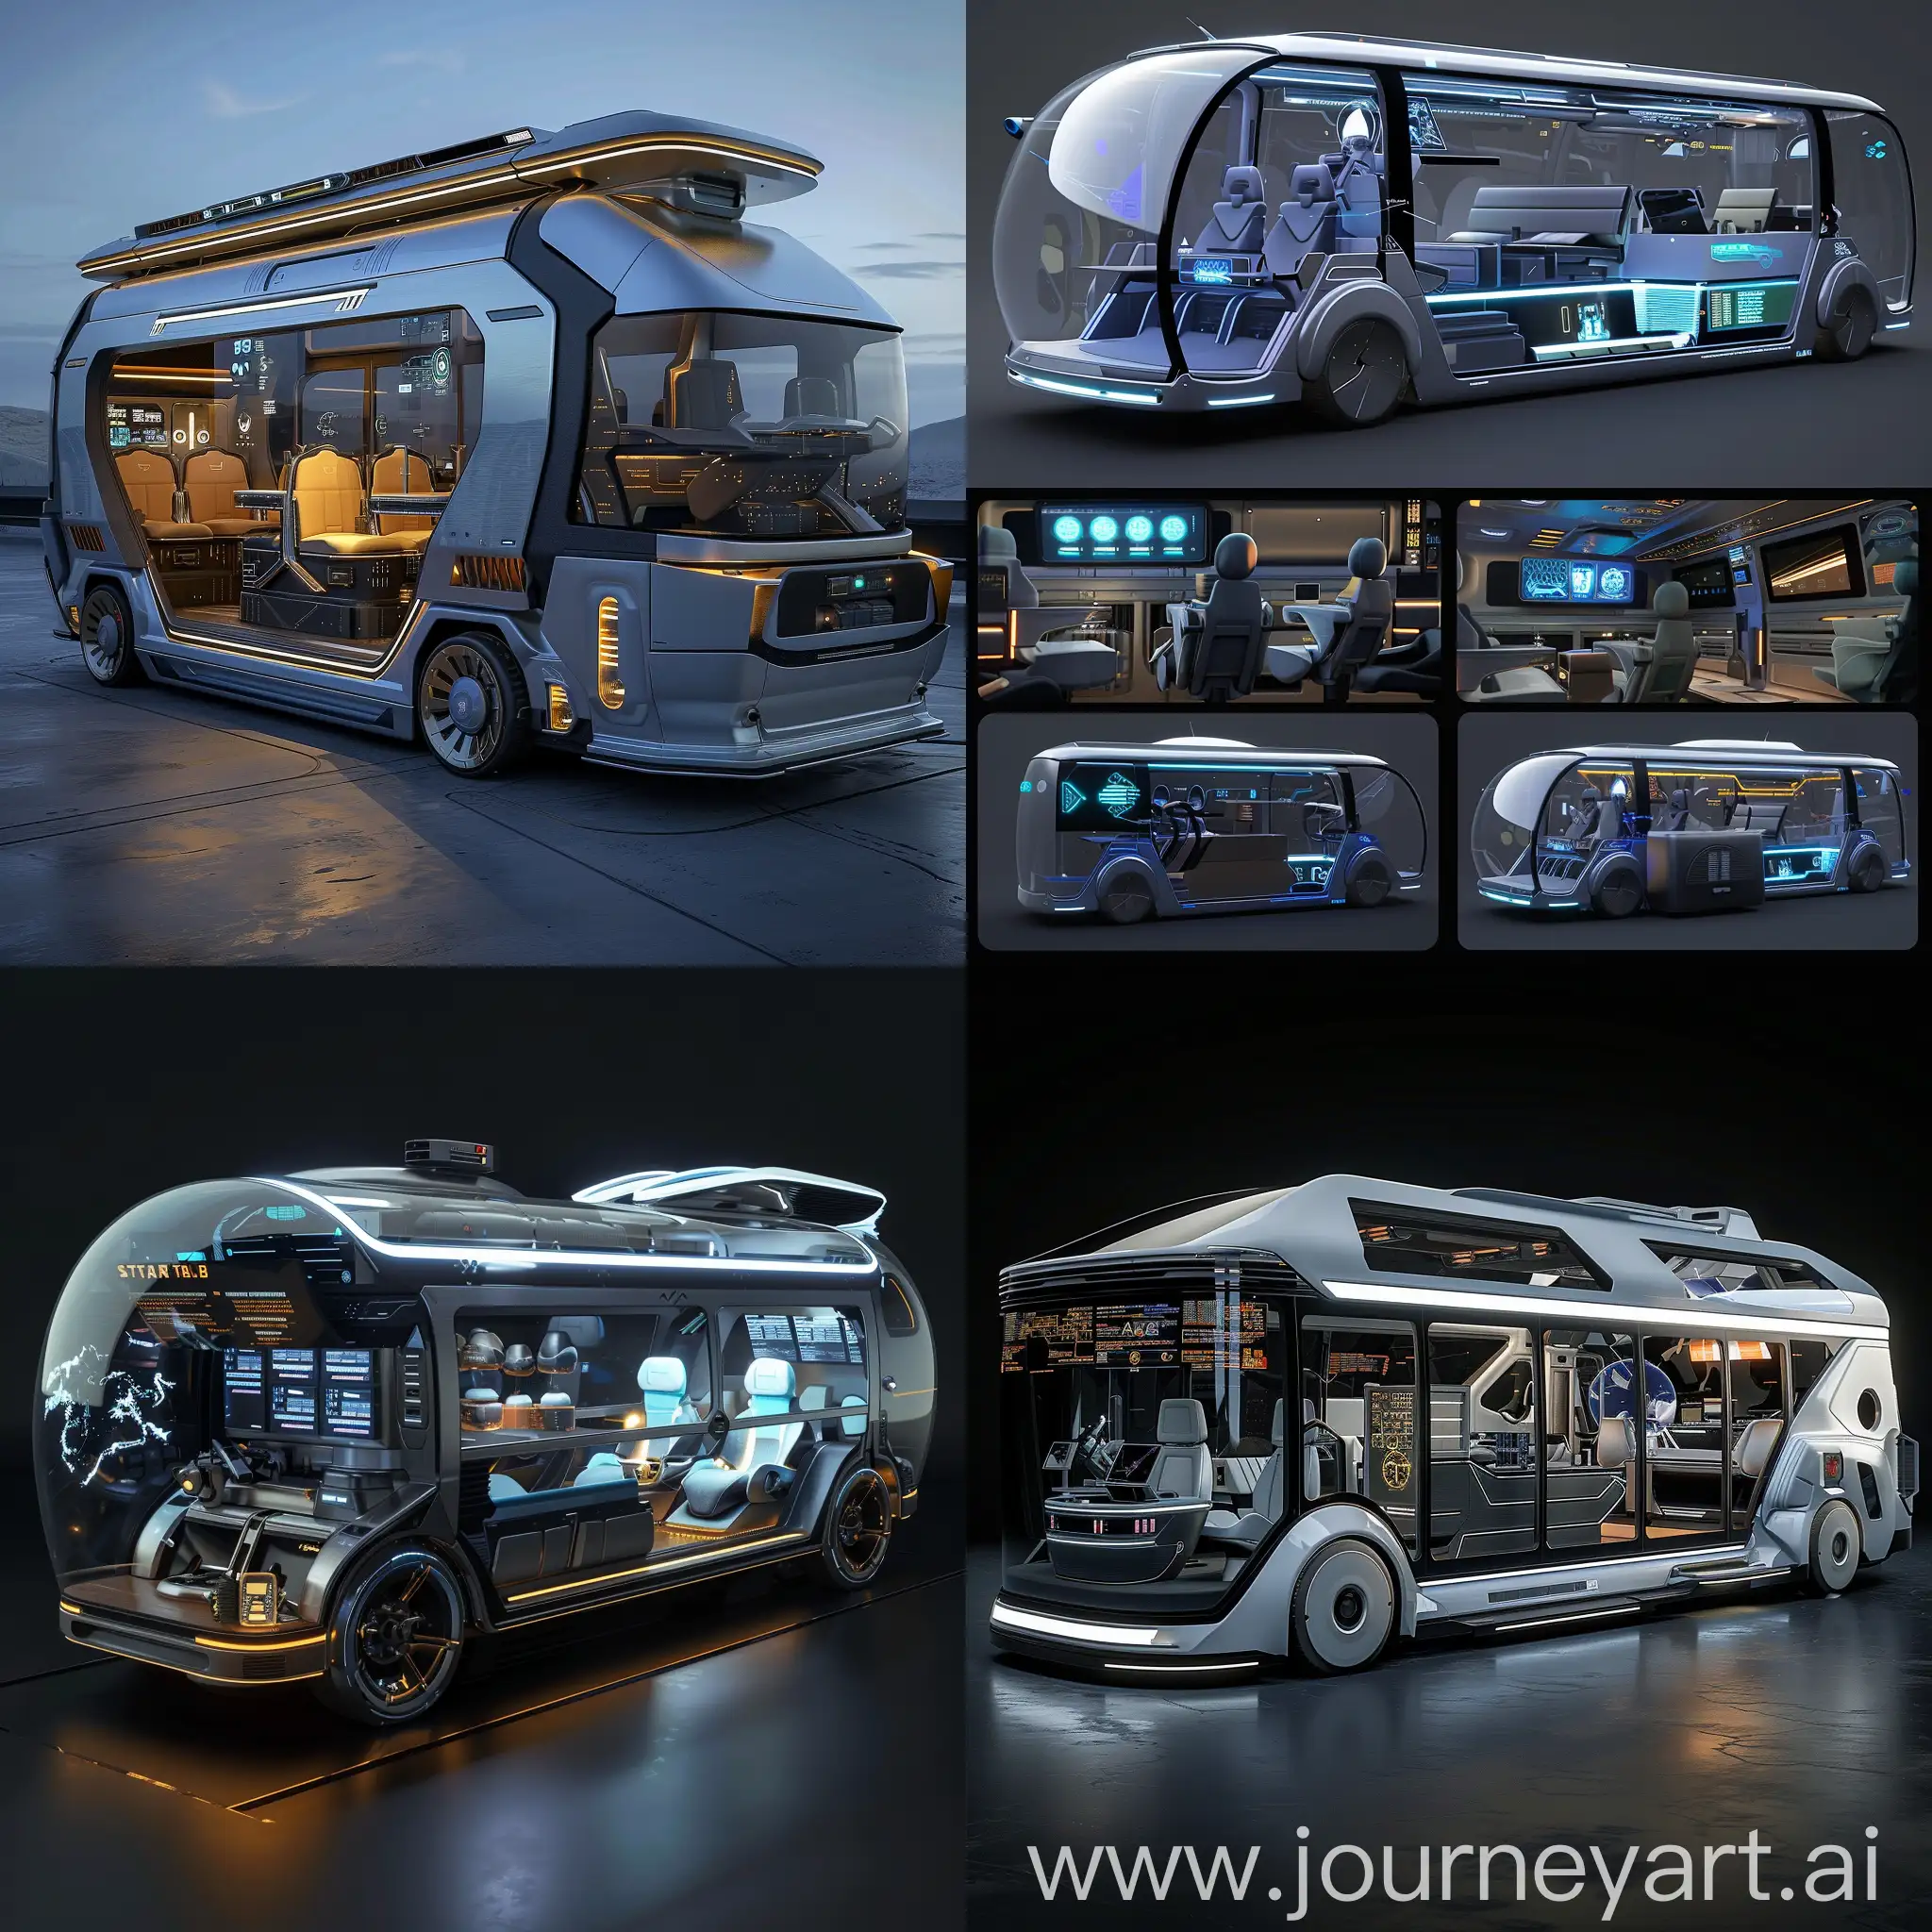 Futuristic microbus, Transparent Aluminum Windows (Star Trek), Modular Seating with Climate Control (Alien), Holographic Entertainment (Star Wars), Smart Kitchen and Beverage Station (Mass Effect), Robotic Cleaning (Wall-E), Interactive Mood Lighting (Blade Runner), AI Assistant for Navigation and Control (Her), Biometric Security and Access (Dune), Augmented Reality Information (Ready Player One), Environmentally-Friendly Features (The Martian), Kinetic Energy Harvesting Panels (Elysium), Active Aerodynamics (Tron), Chameleon Paint Job (A Wrinkle in Time), Heads-Up Display Windshield (Halo), Retractable Landing Gear (Back to the Future), Drone Delivery System (Star Wars), Solar Roof Panels (Star Trek), Interactive LED Headlights and Taillights (Cyberpunk 2077), Self-Healing Body Panels (Terminator 2), Expandable Cargo Bays (变形金刚 Biànxíng Jīngāng - Transformers), unreal engine 5 --stylize 1000